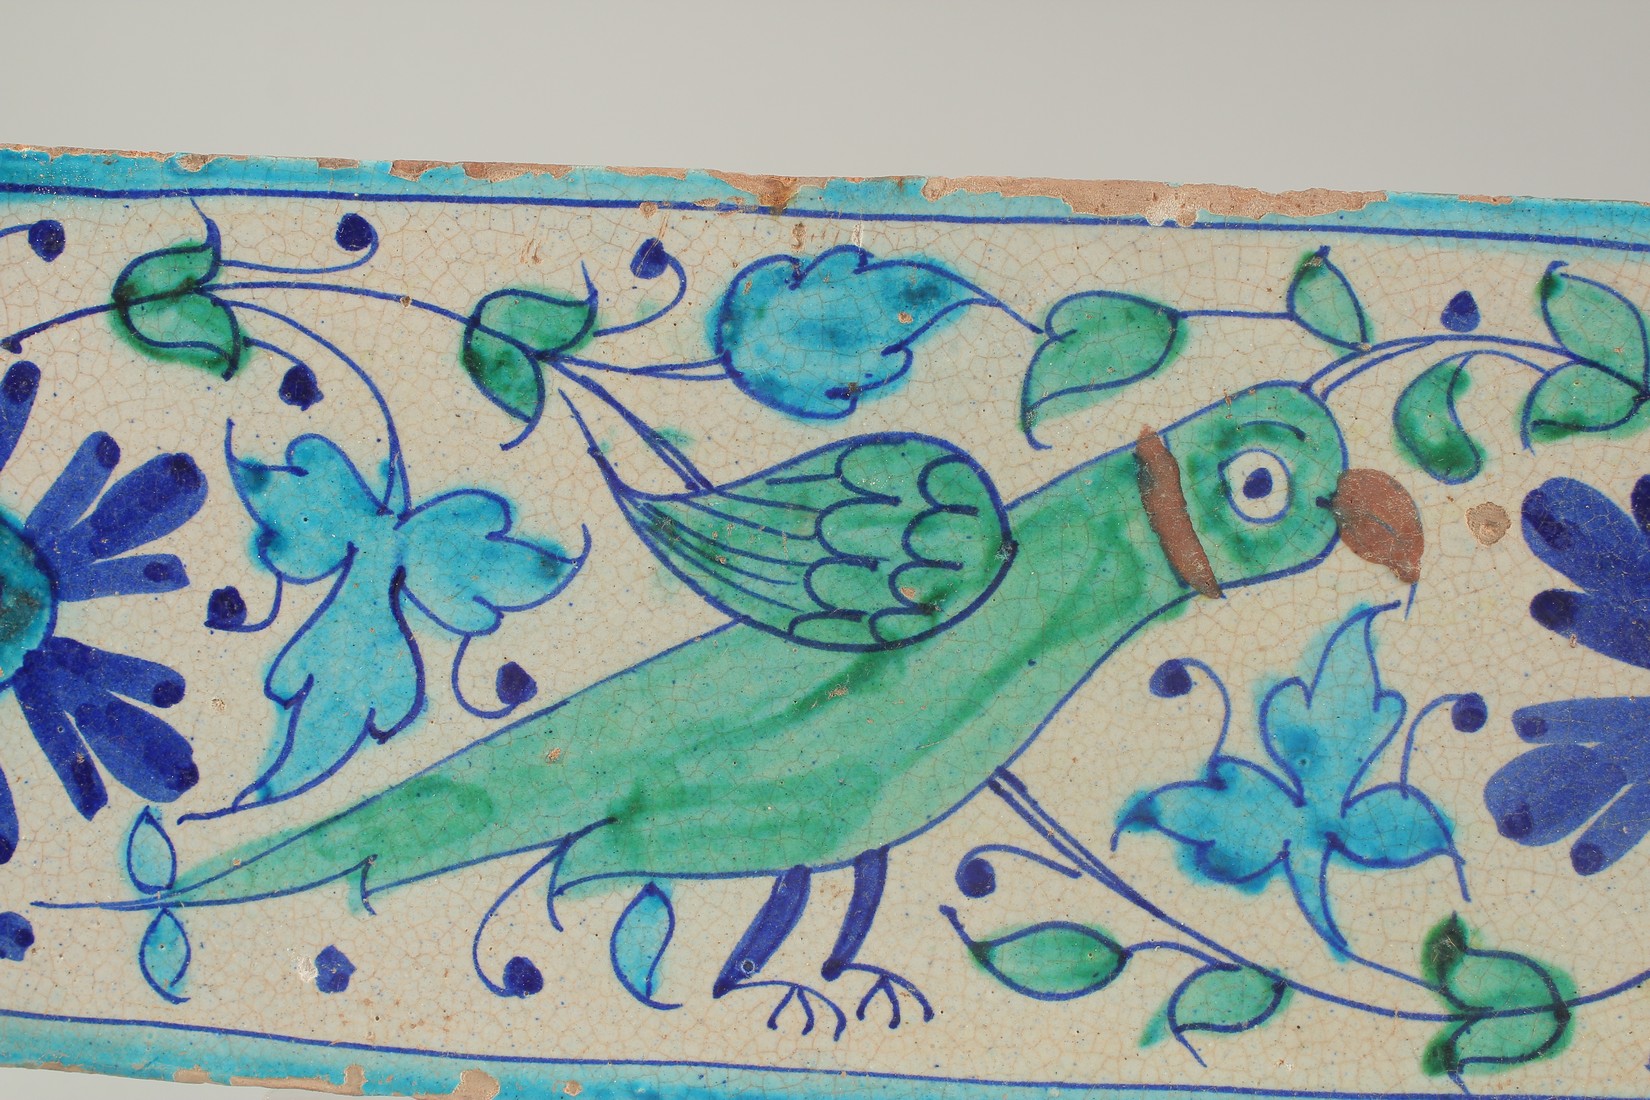 AN EARLY 19TH CENTURY NORTH INDIAN MULTAN GLAZED POTTERY TILE, painted with a parrot, 30.5cm x - Image 2 of 3